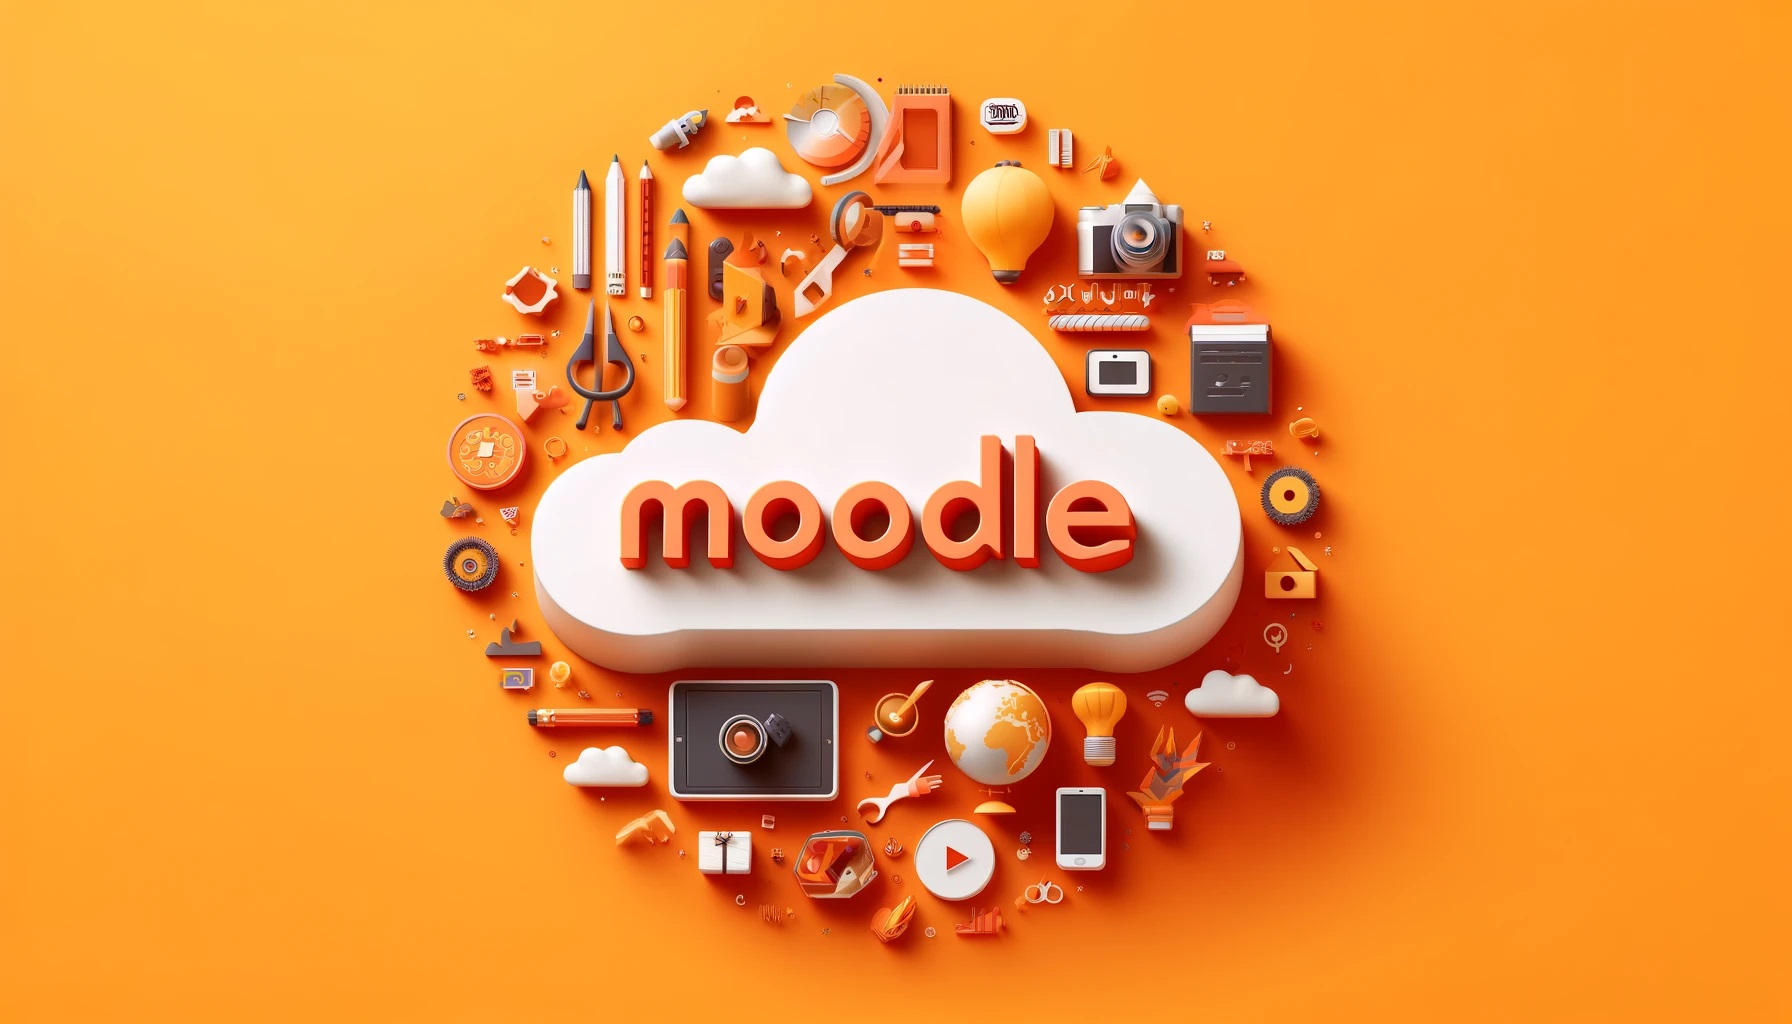 KI generated image moodle cloud with small items around